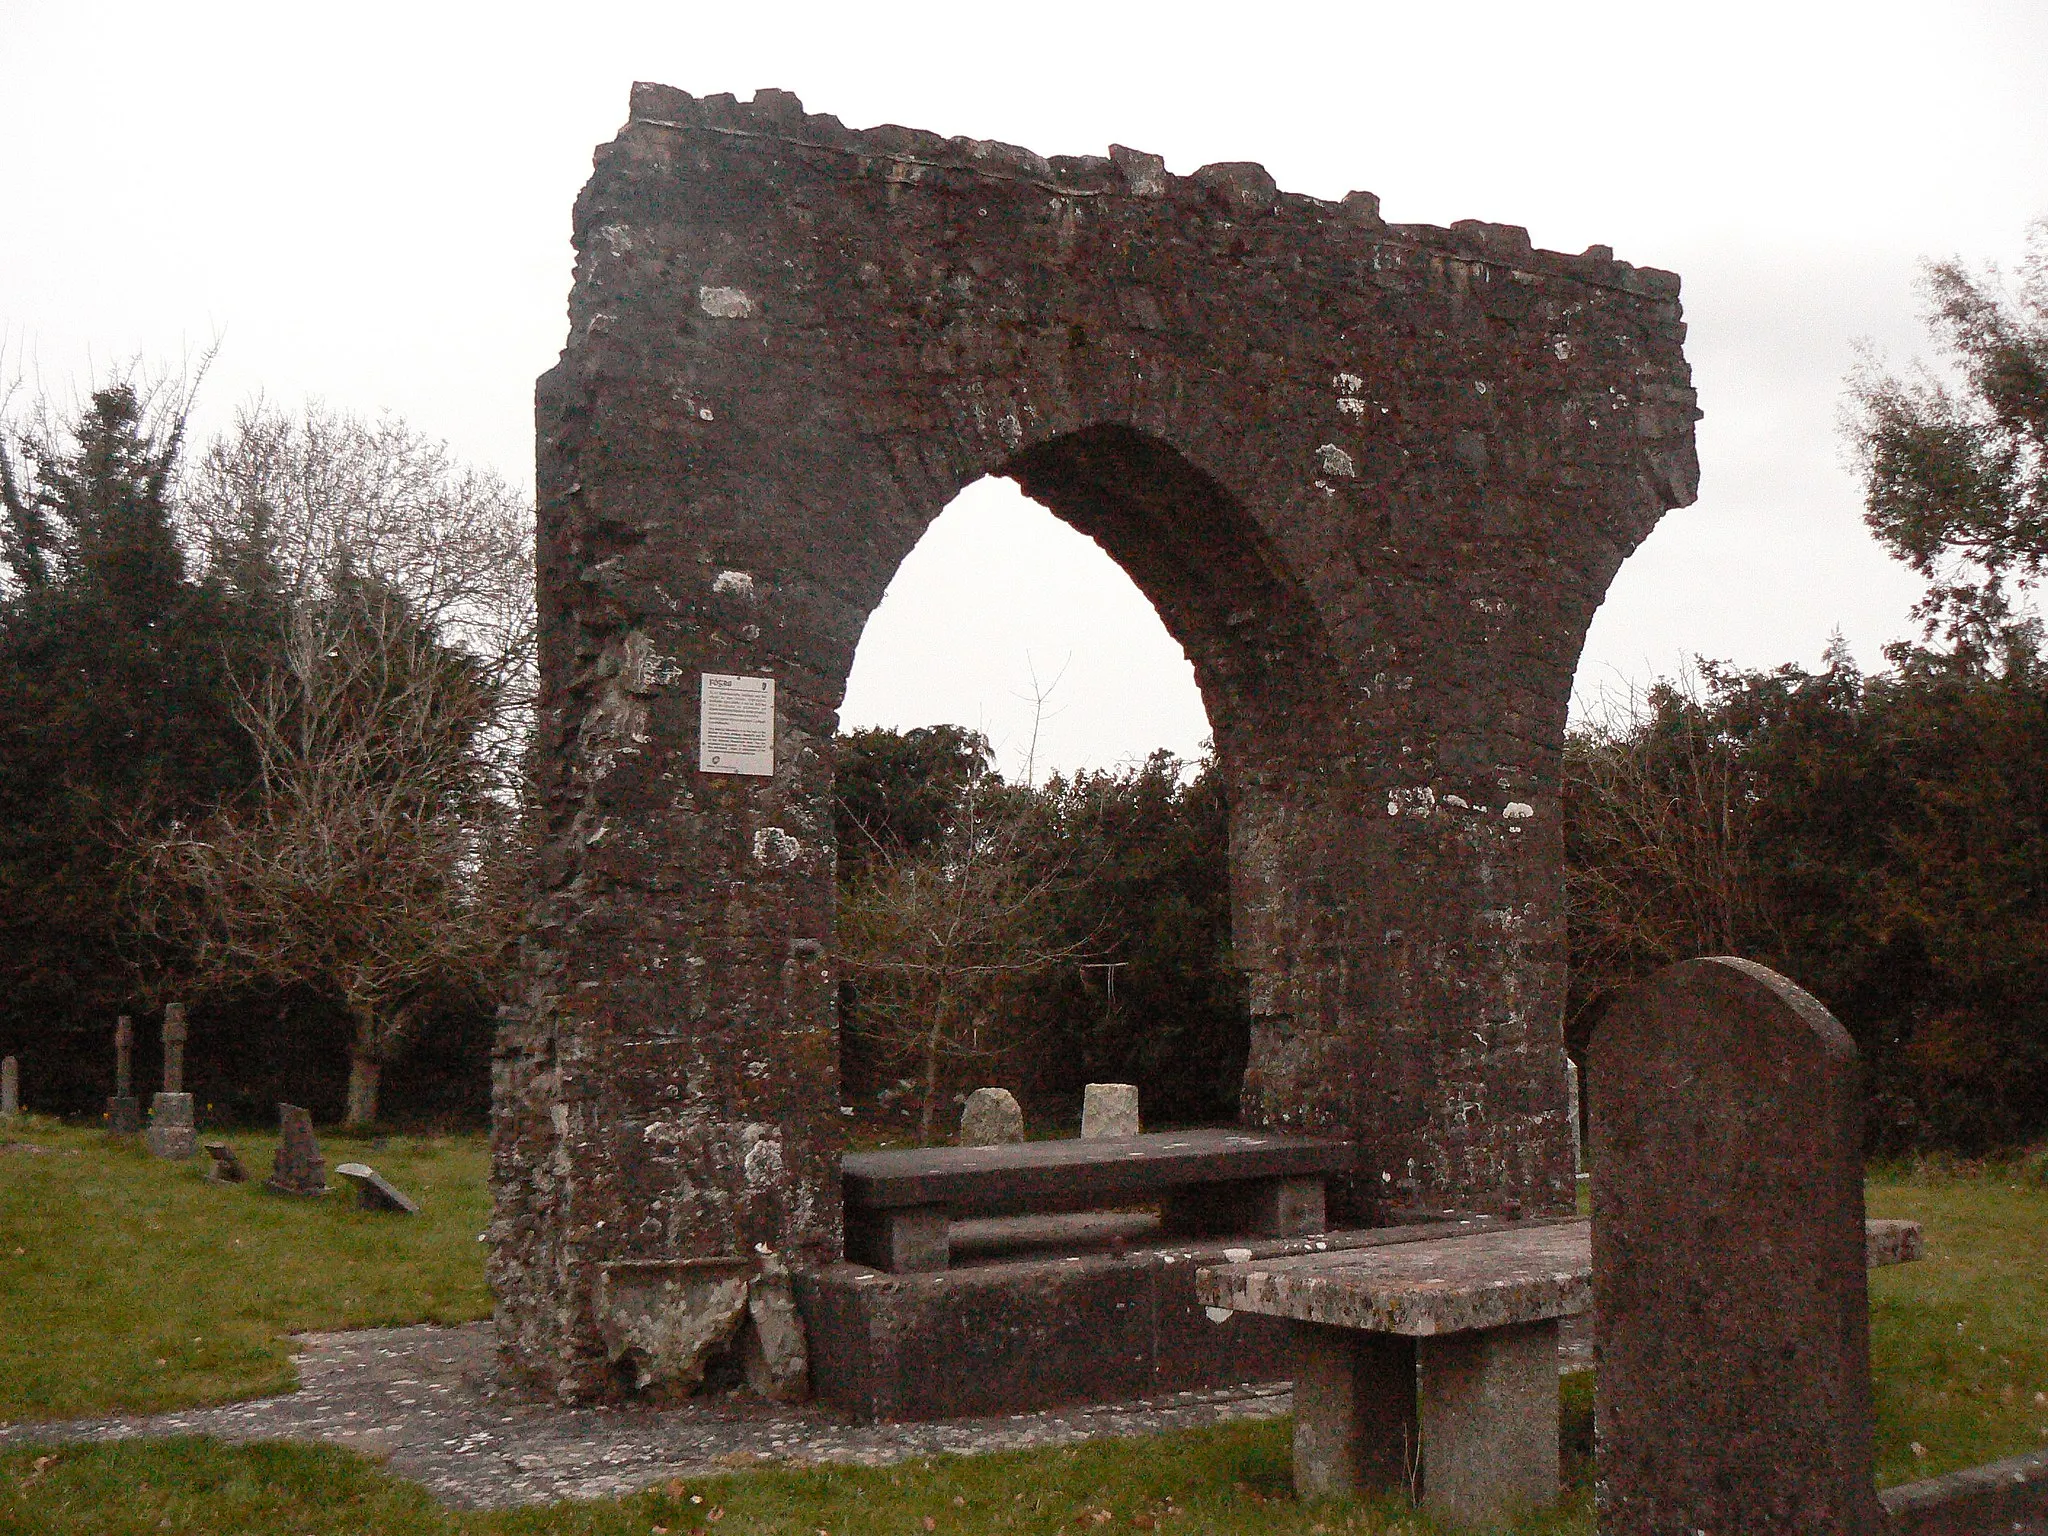 Photo showing: Remains of the monastic site of Saint Seachnall. Domhnach Seachnaill, Seachnall's Church, is the name in ecclesiastical sources for the town in Irish, while Dún Seachlainn appears in secular sources.